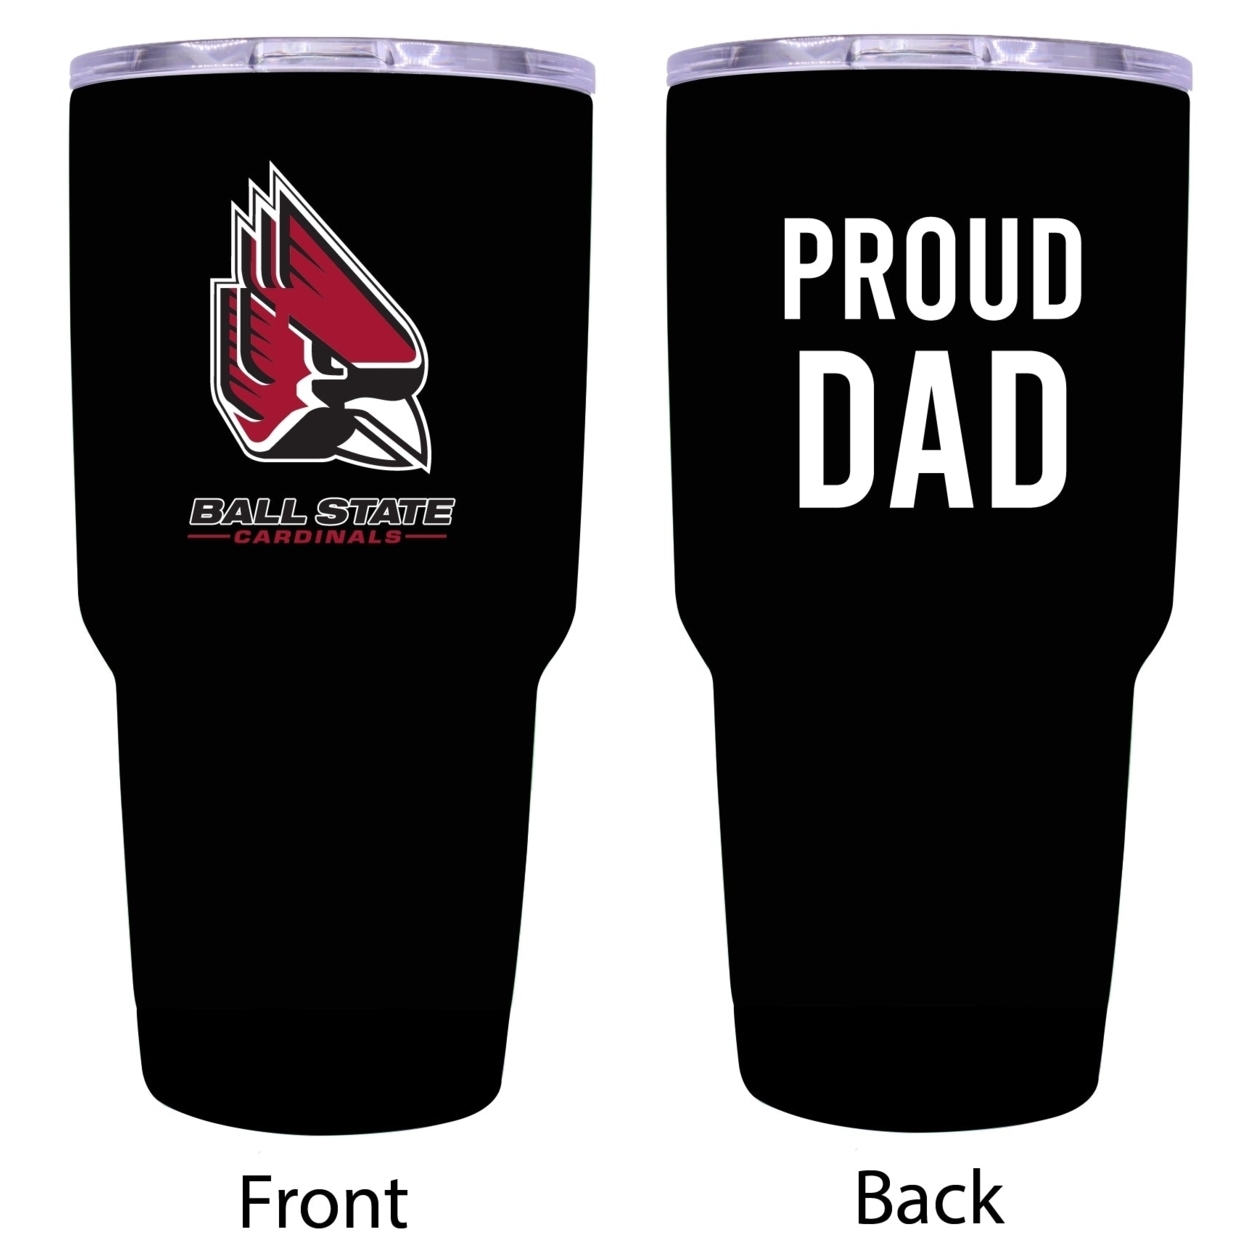 Ball State University Proud Dad Insulated Stainless Steel Tumbler